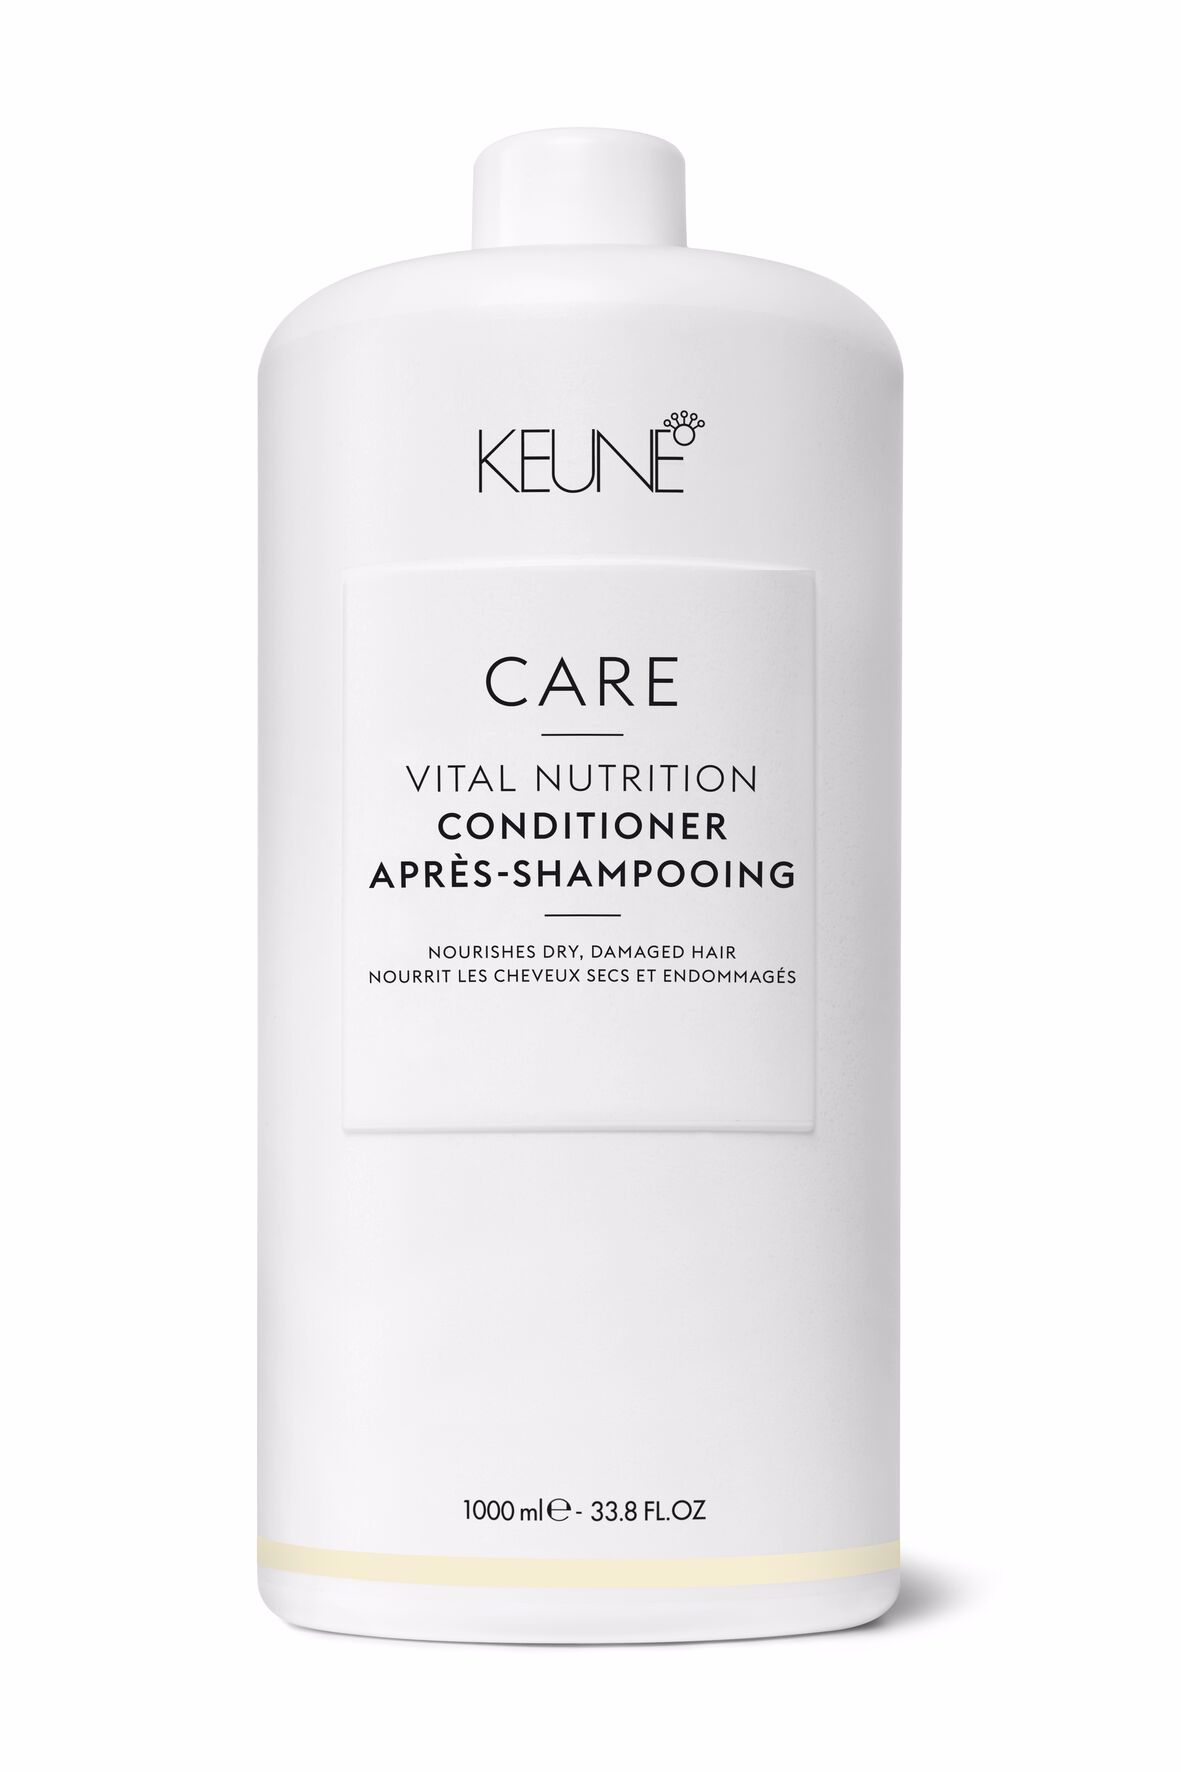 CARE VITAL NUTRITION CONDITIONER is the ideal hair care product for all hair types. Explore this hair product with Provitamin B5 for moisture and shine for dry hair. On keune.ch.